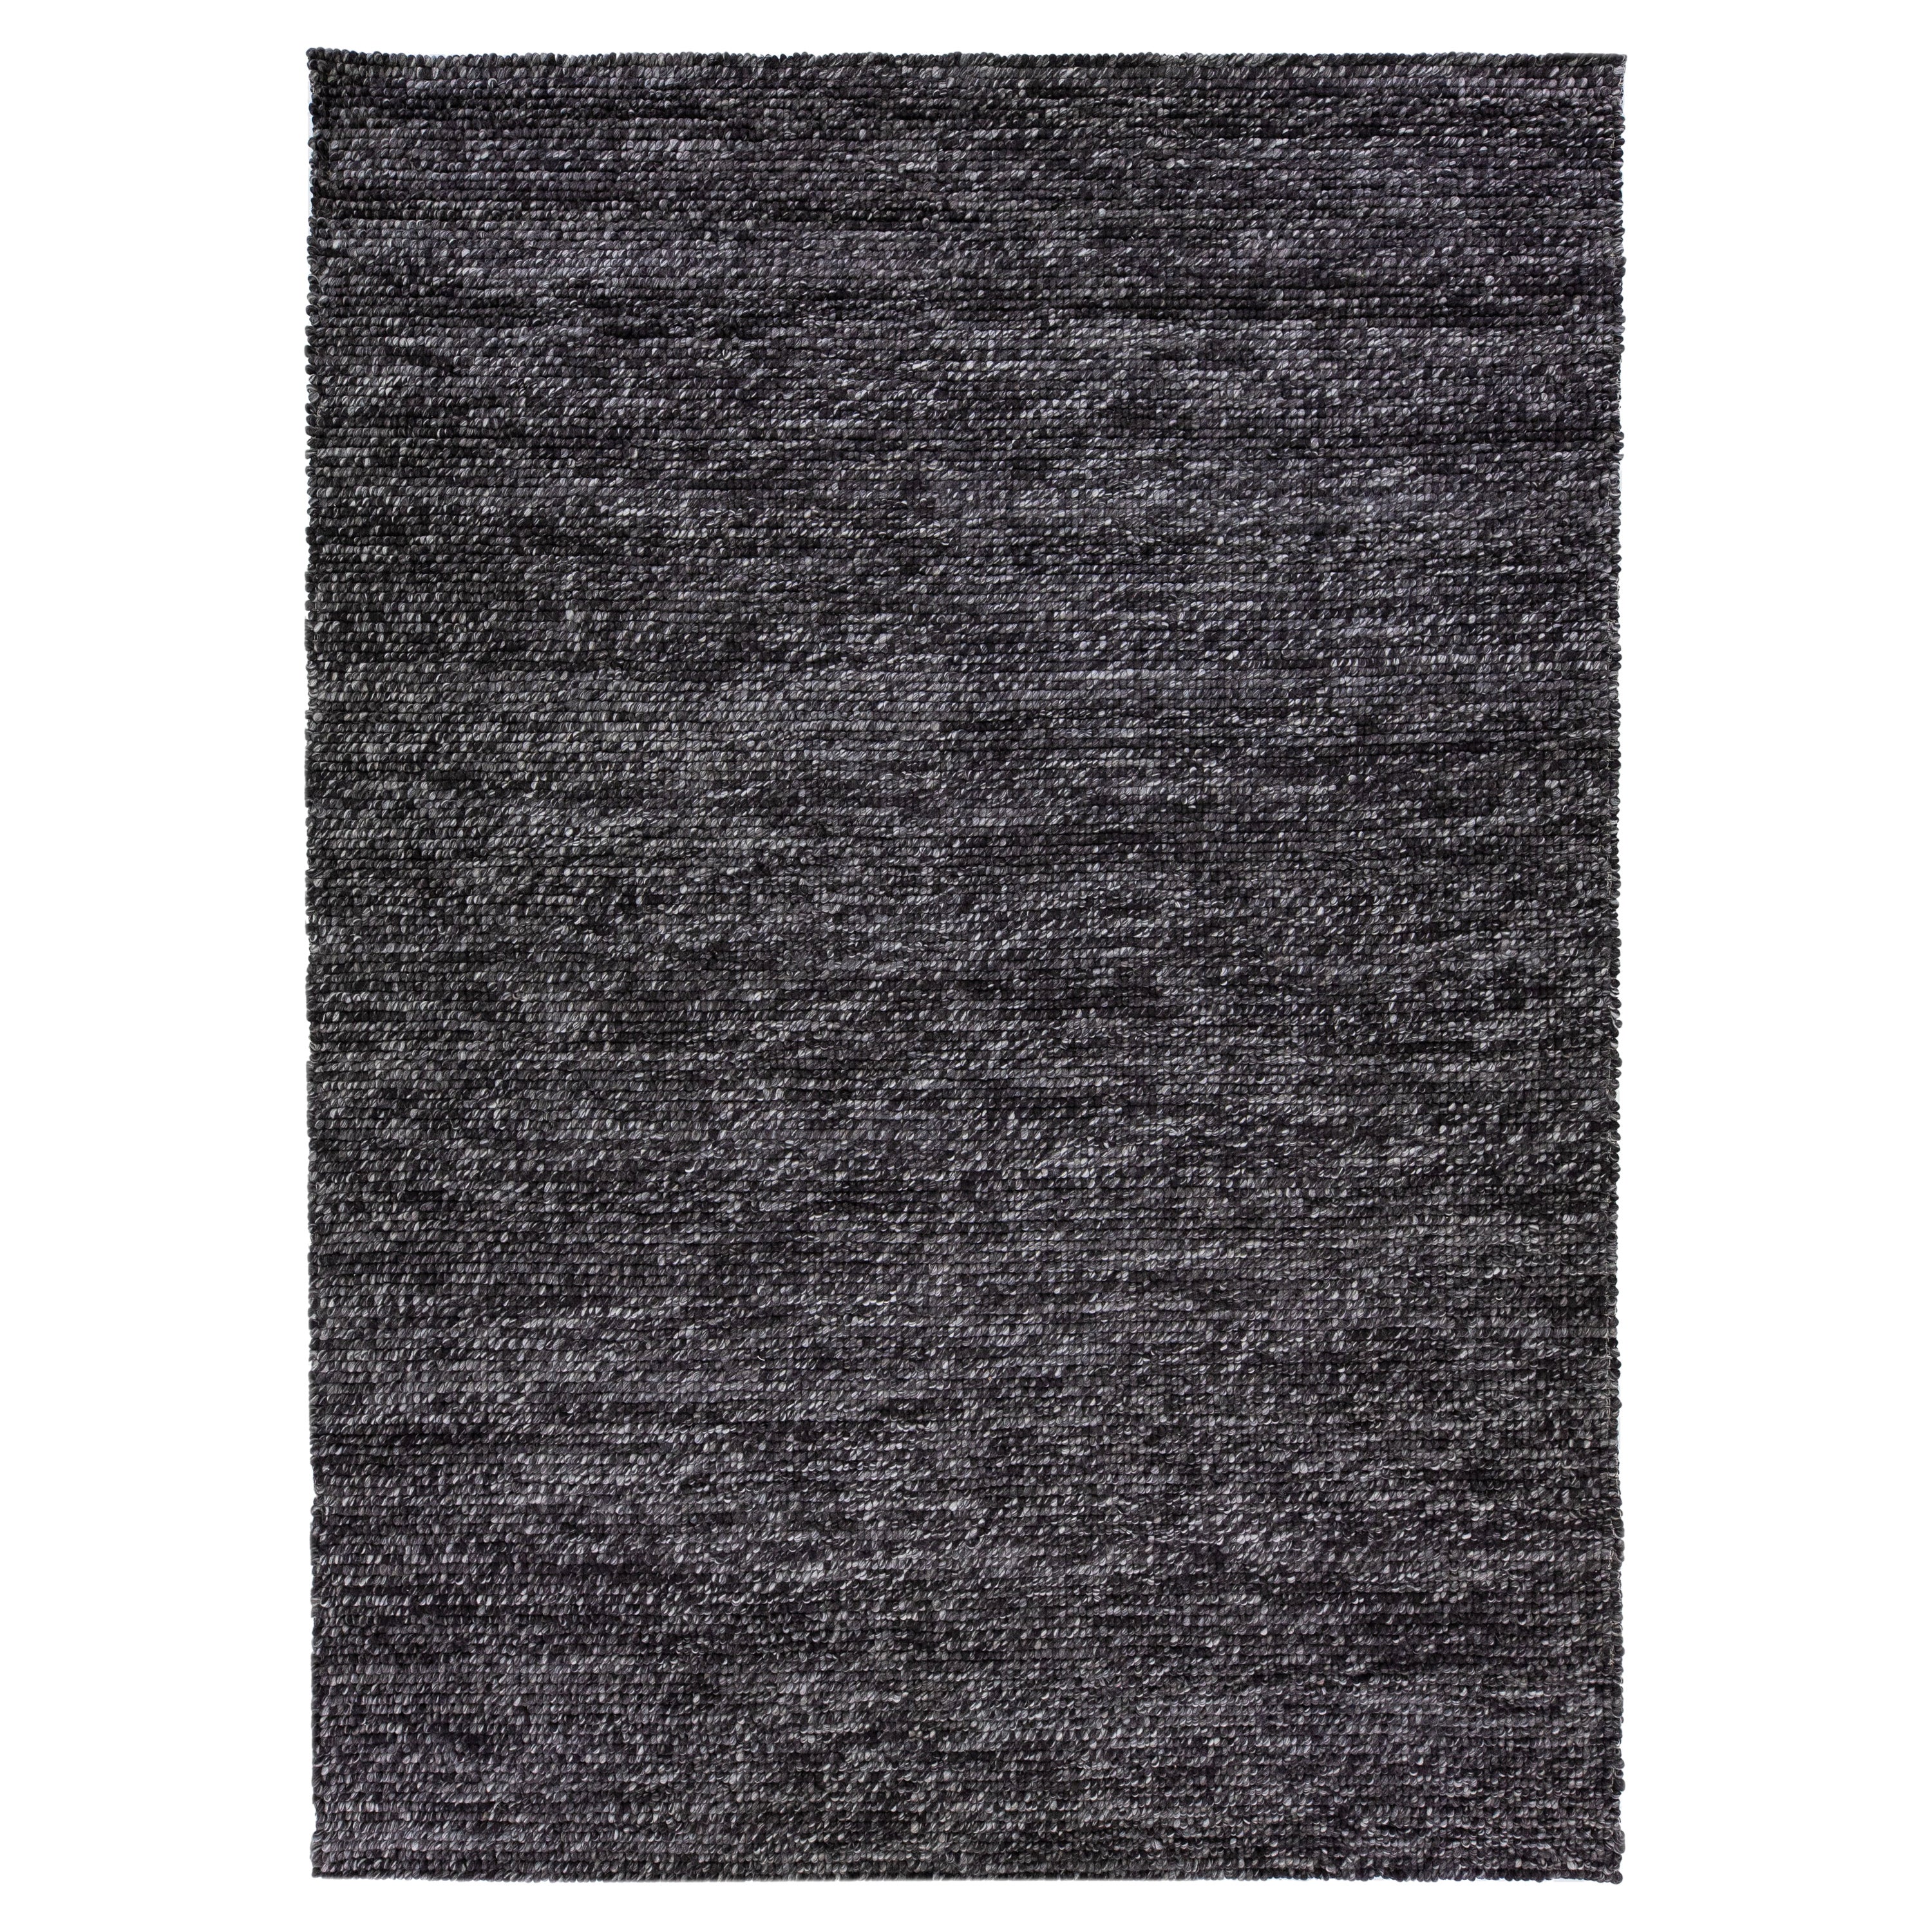 Gray-Charcoal Color Modern Felted Textuted Wool Rug By Apadana For Sale